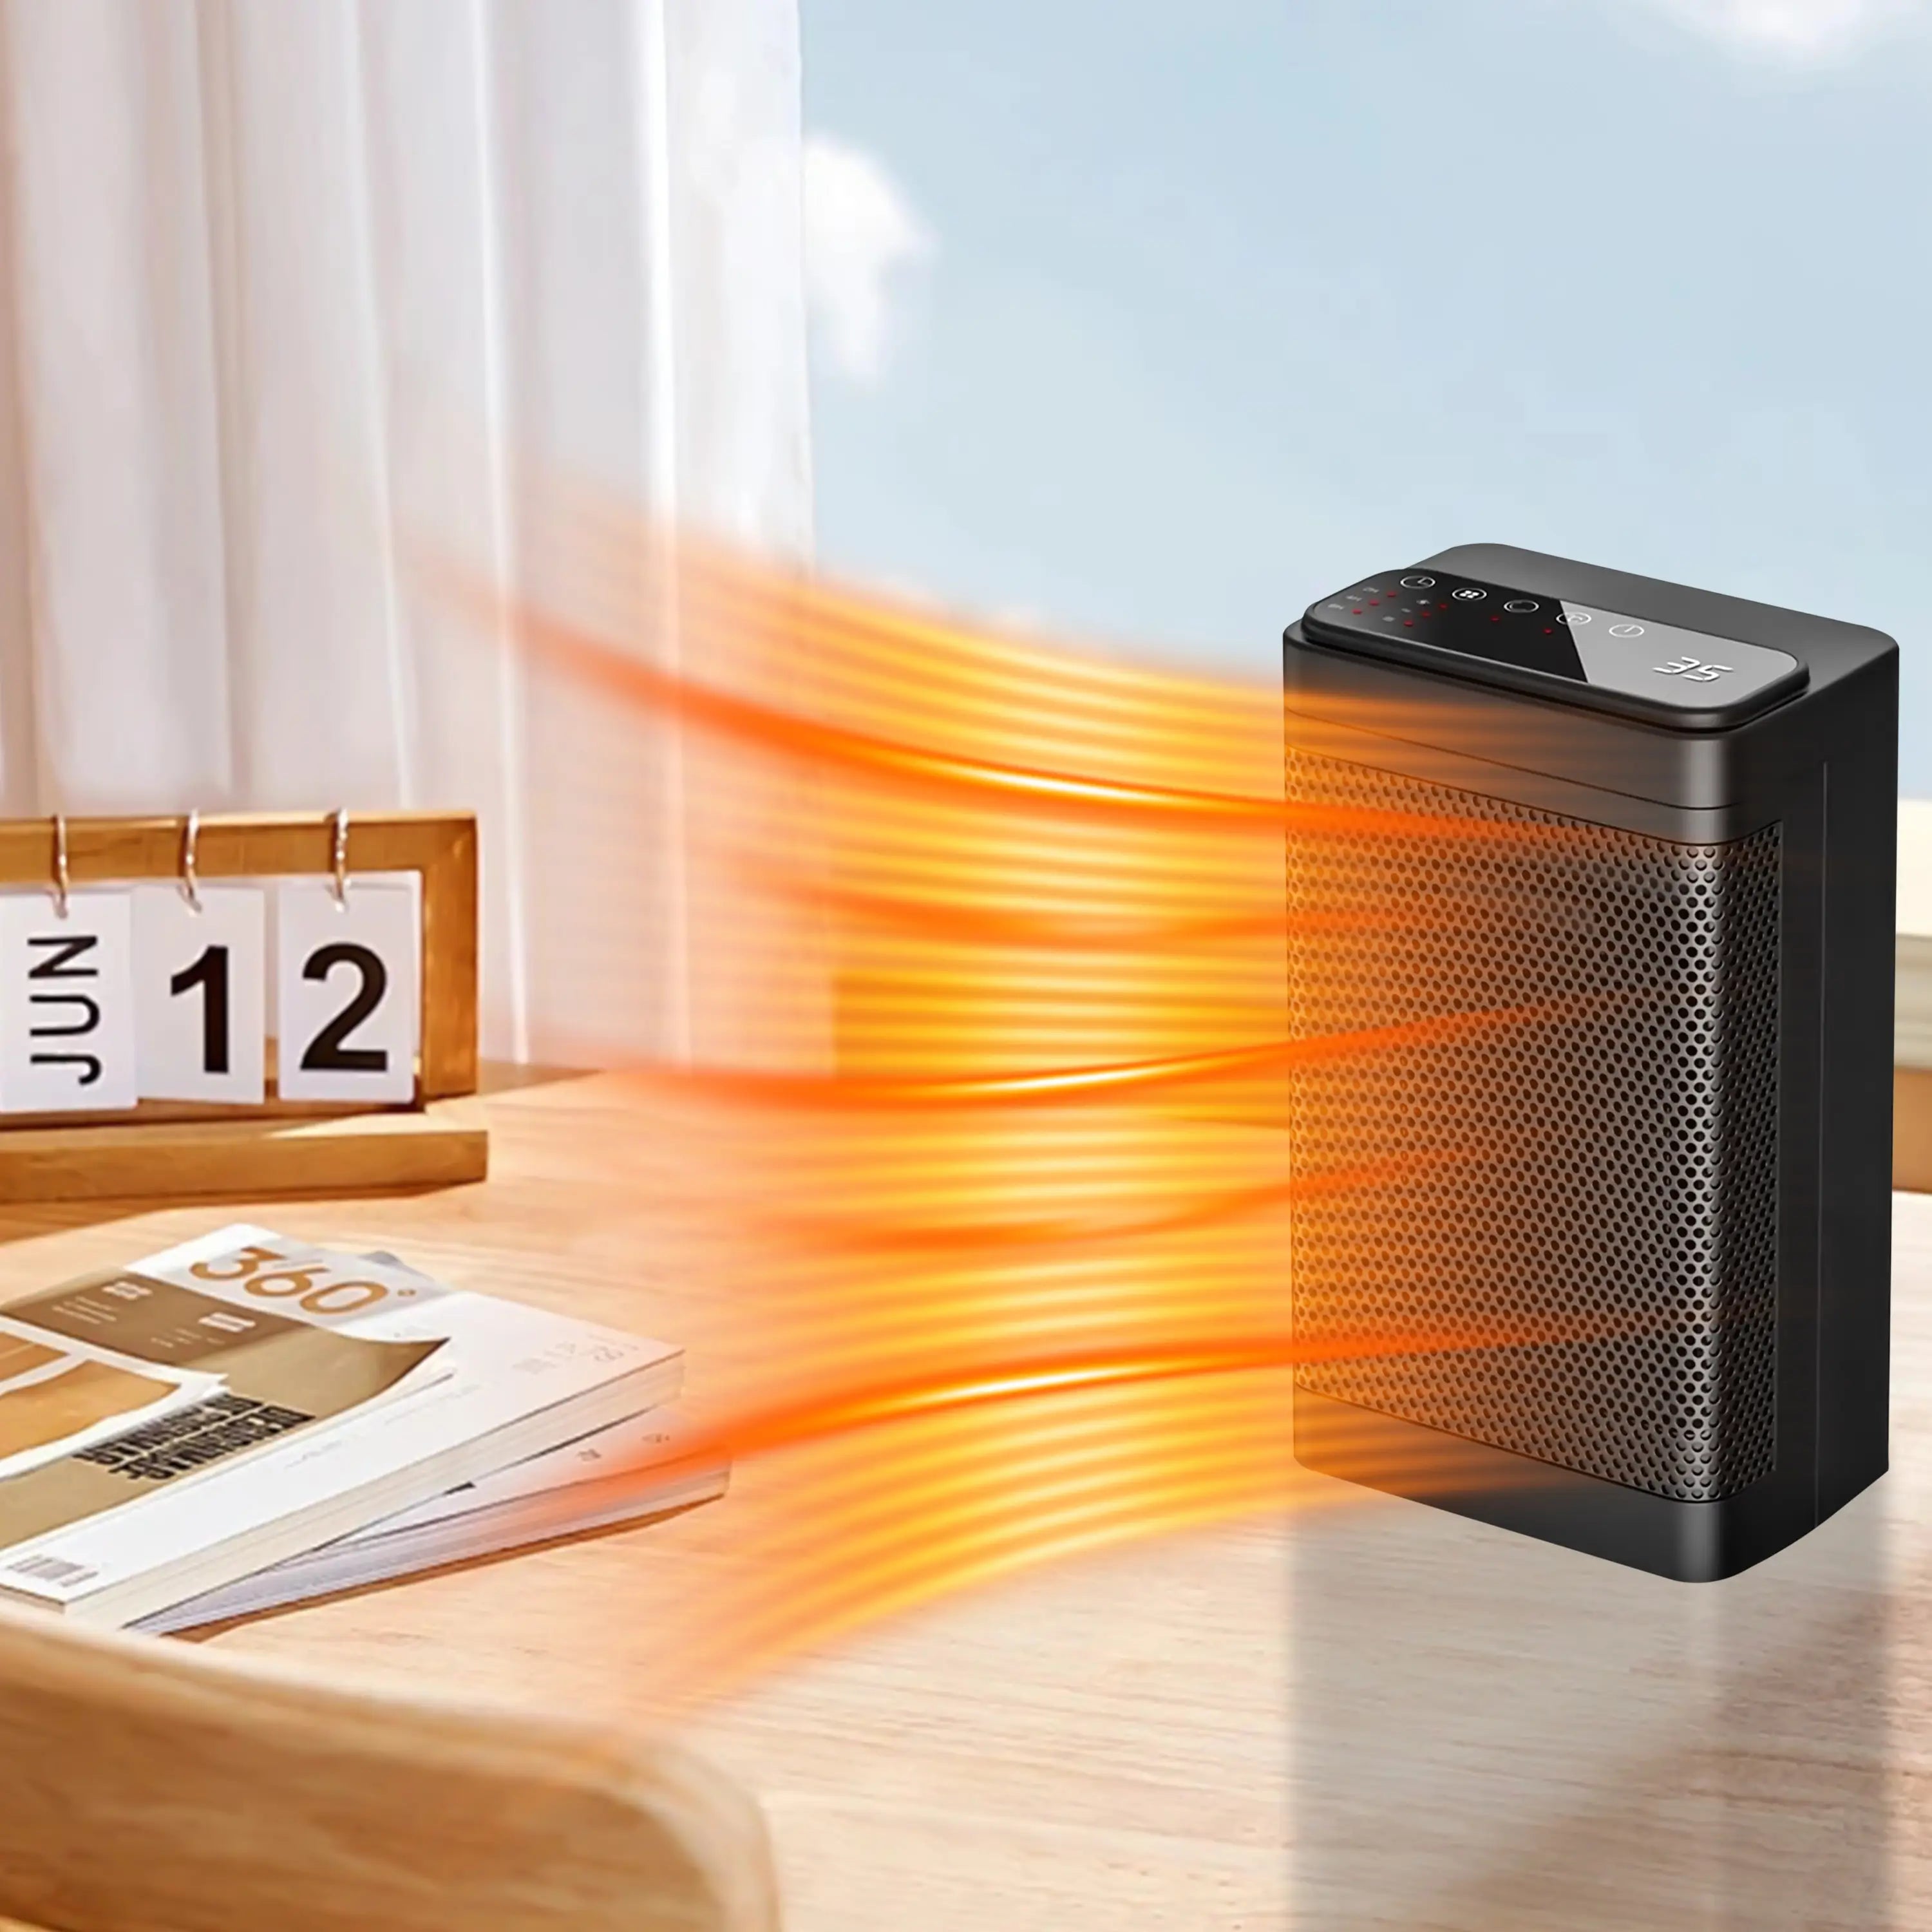 SunnyBreezy 1500W Heater | Portable Electric Heater with Thermostat